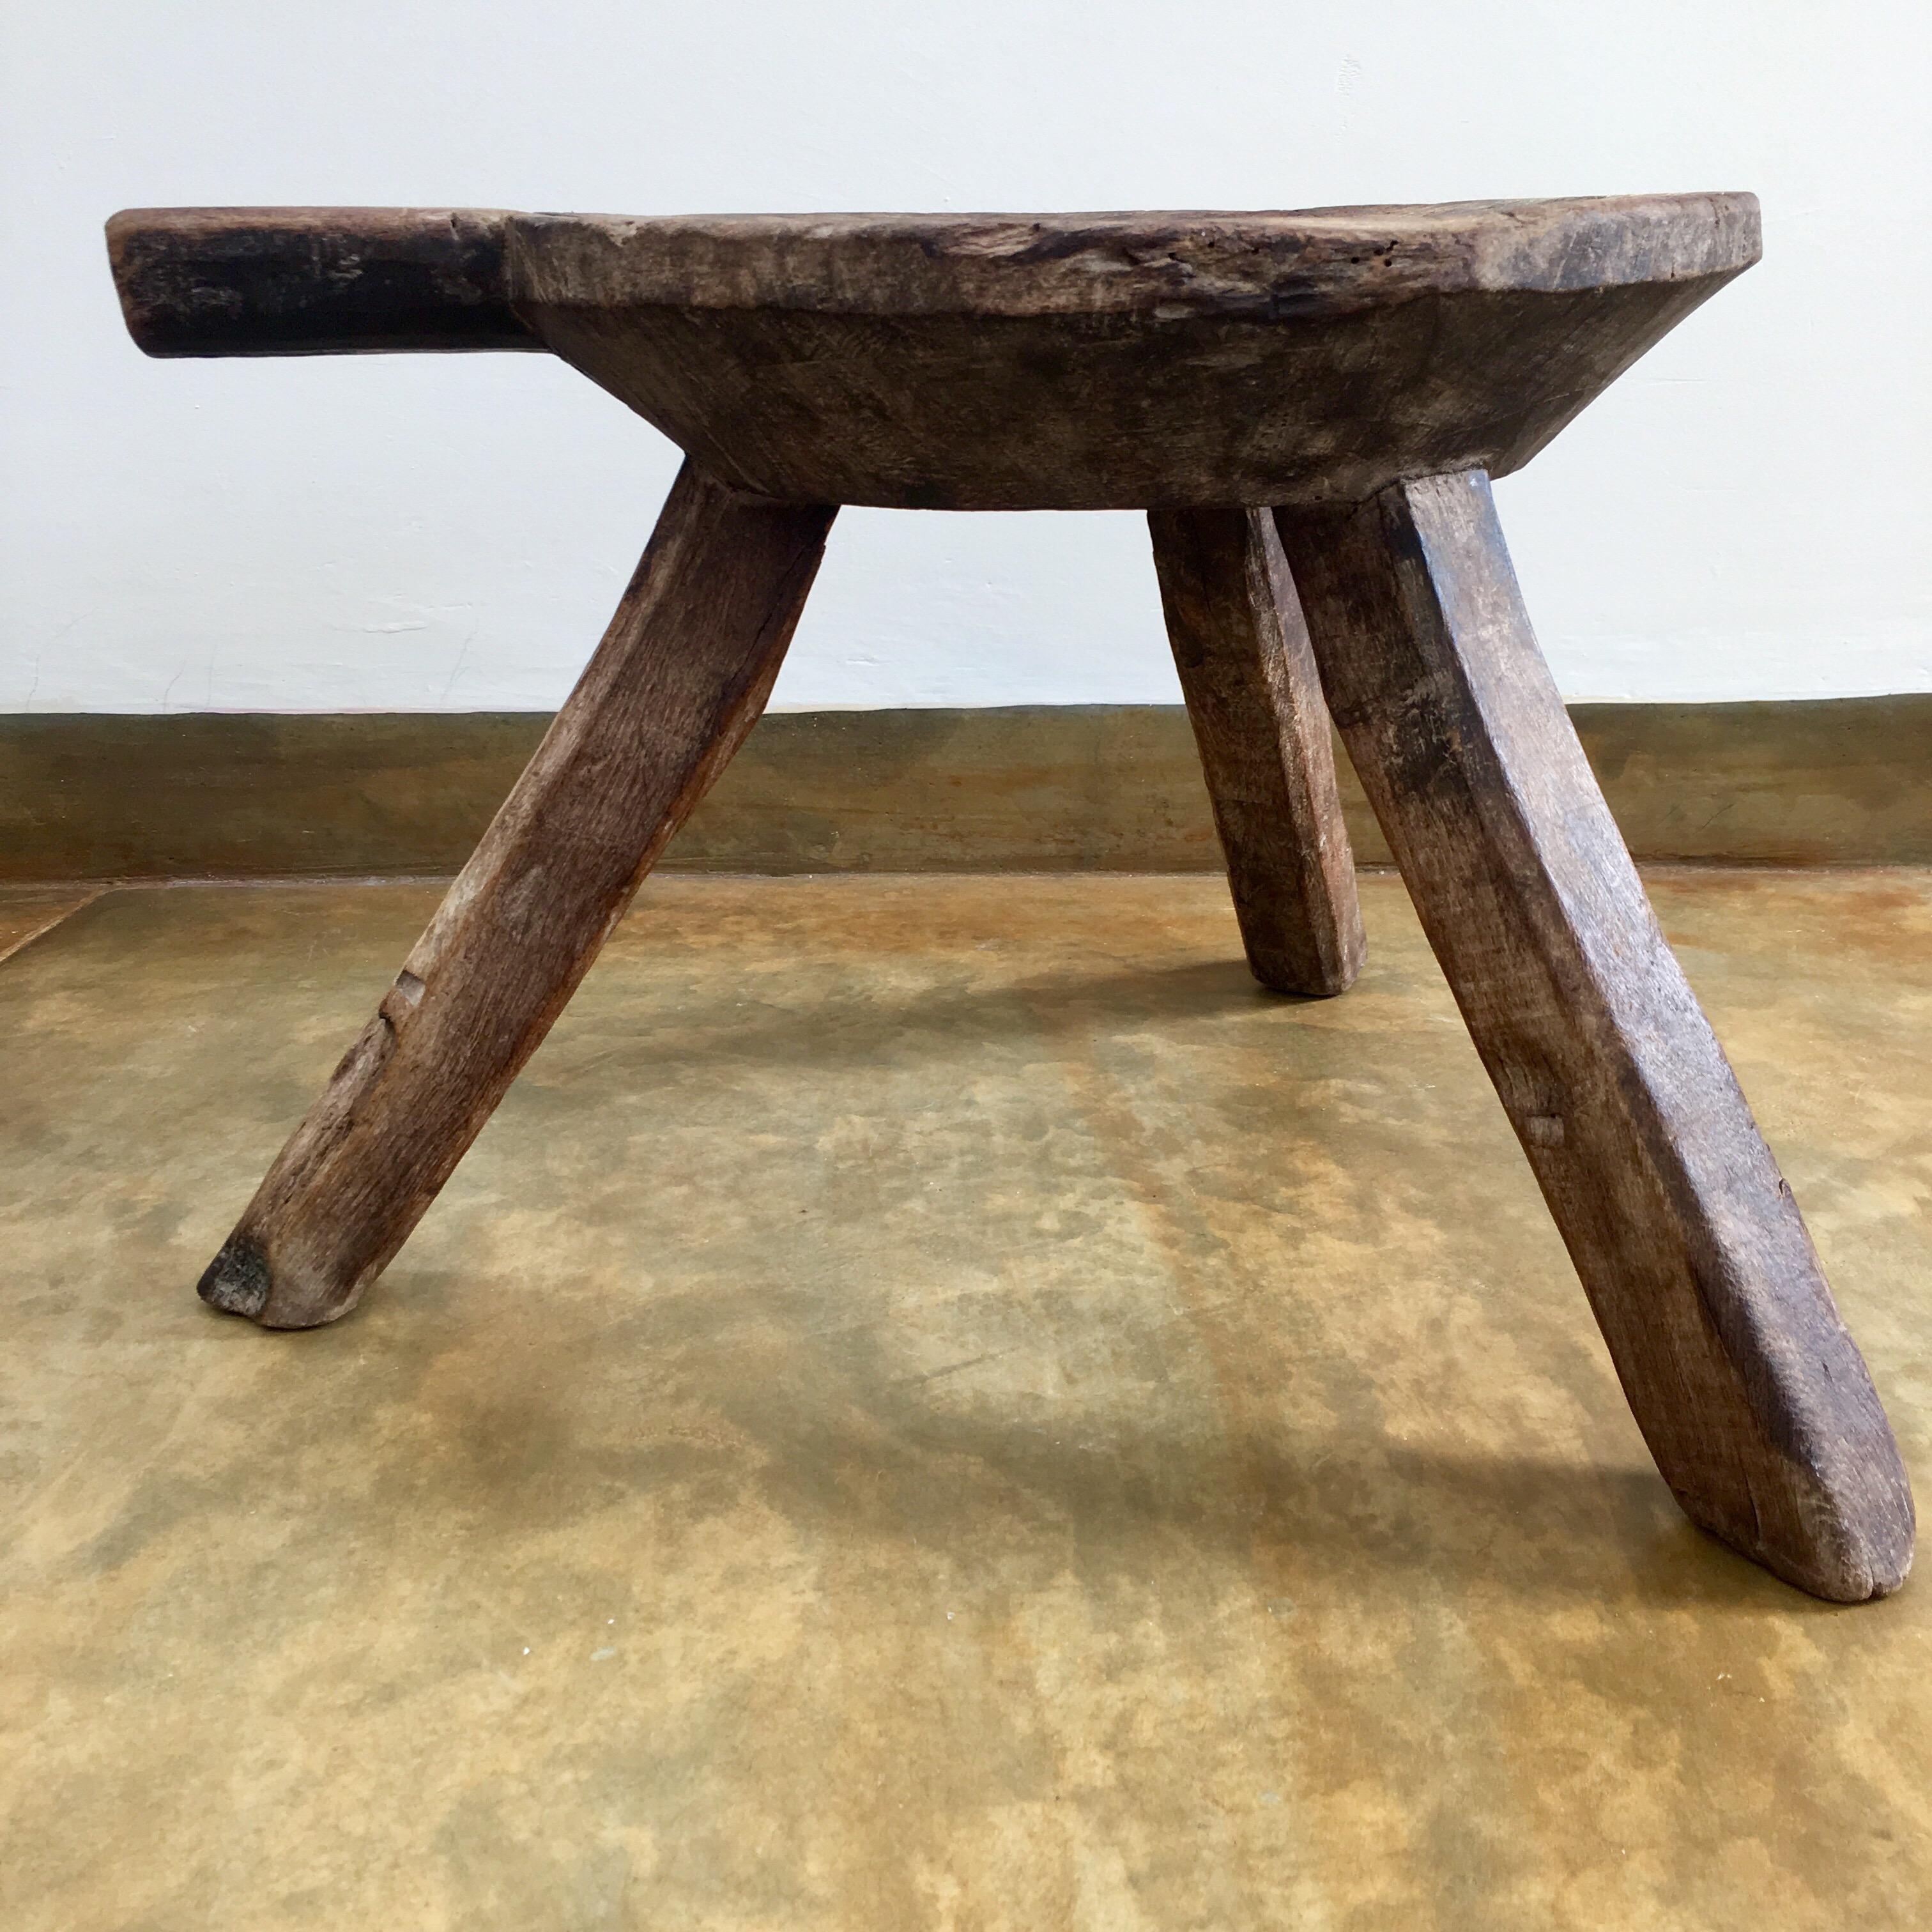 Three-legged mesquite stool from San Luis Potosi, Mexico with handle. Sturdy, completely intact. Beautiful patina. 18